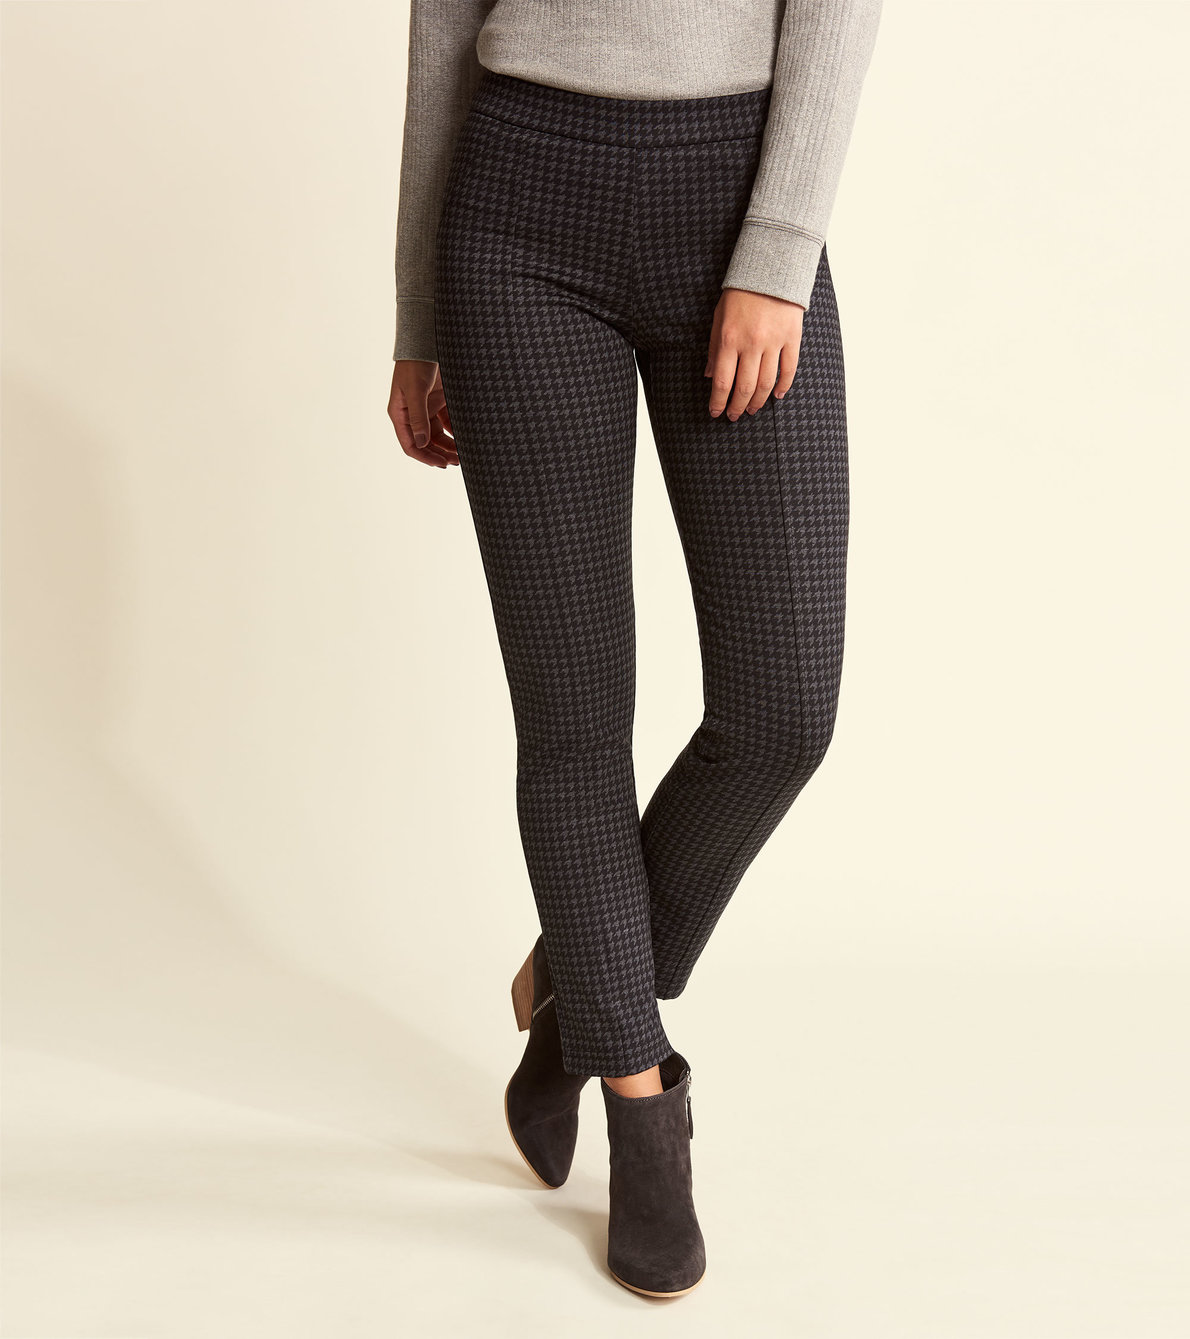 View larger image of Kate Ponte Pants - Houndstooth